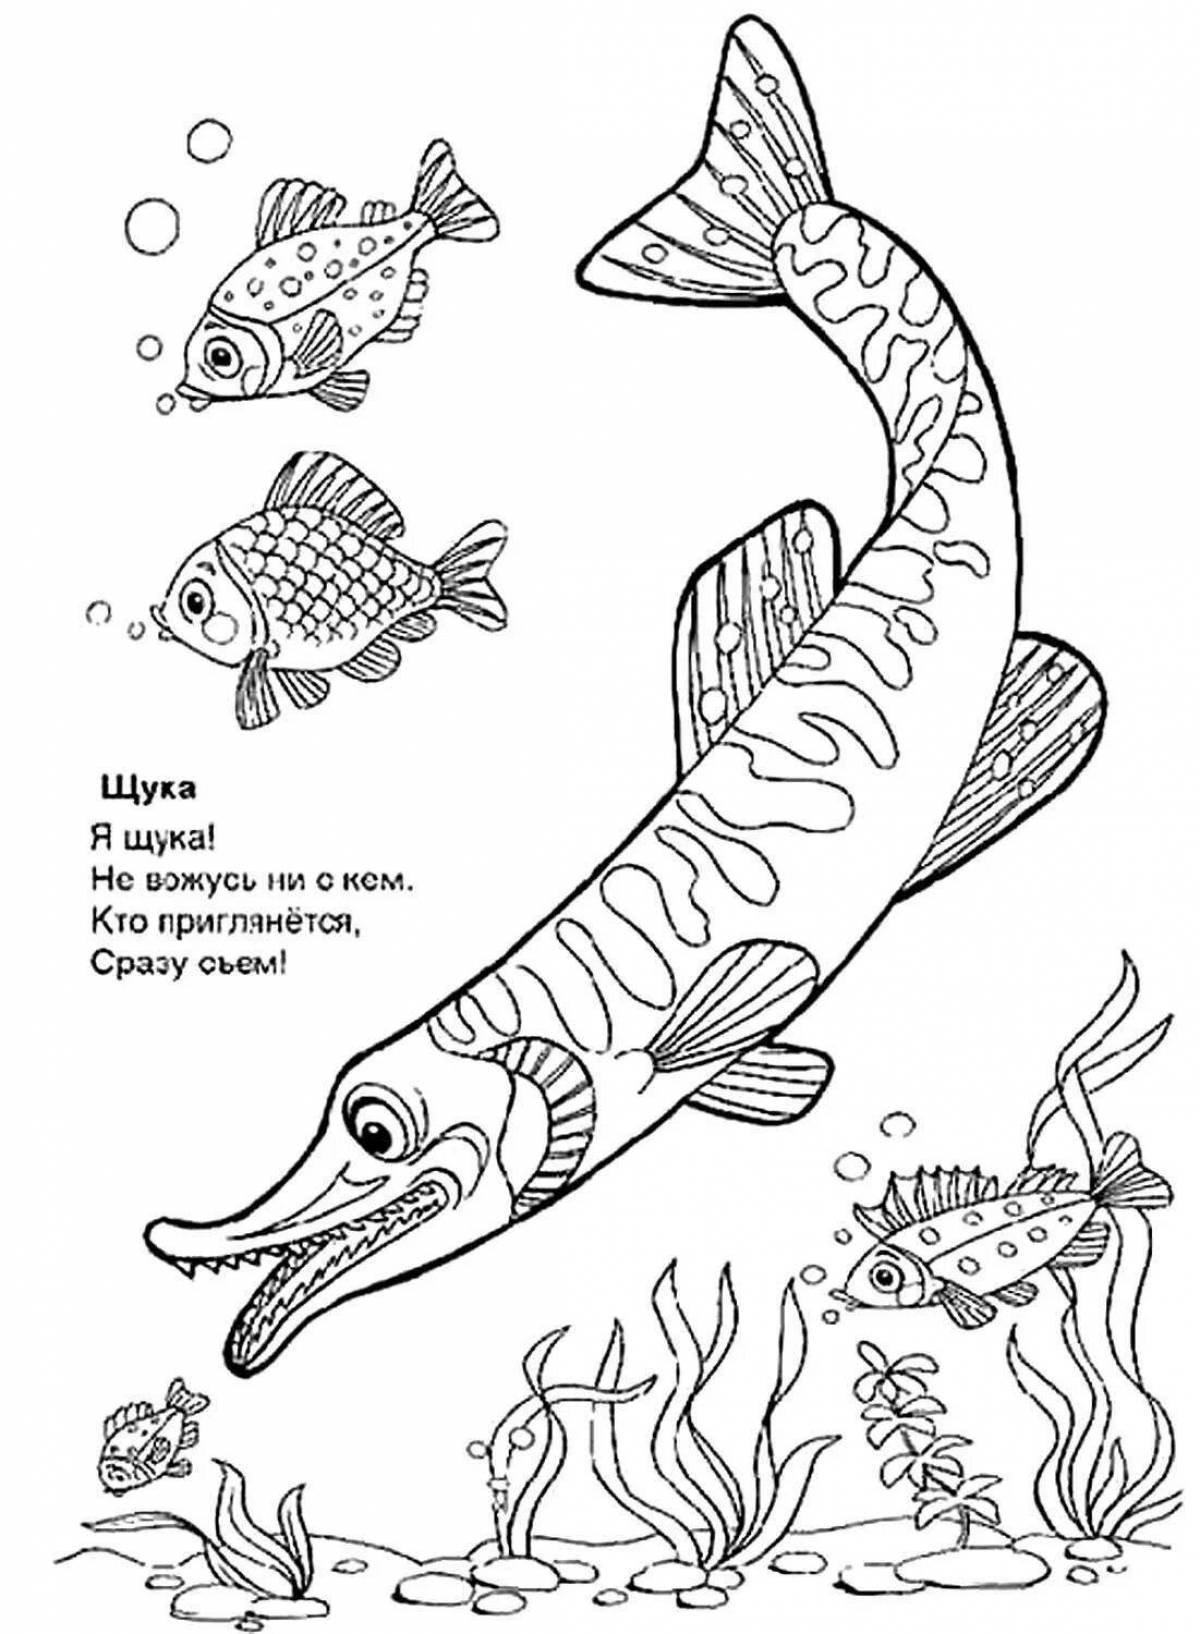 Charming pike coloring page